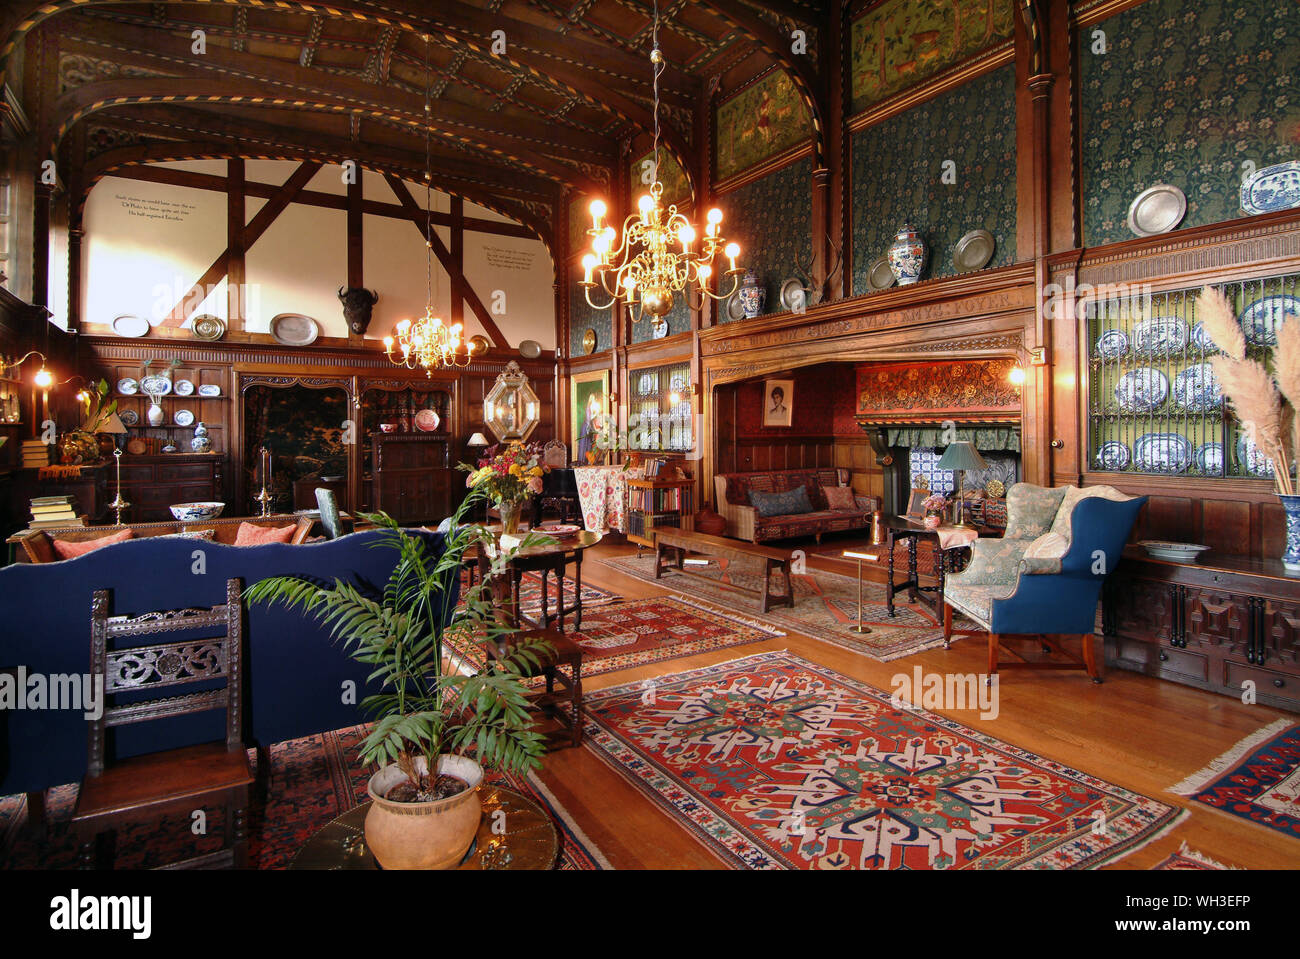 Wightwick Manor, a Victorian house in the Arts & Crafts style, formally owned by Geoffrey Mander MP. Stock Photo